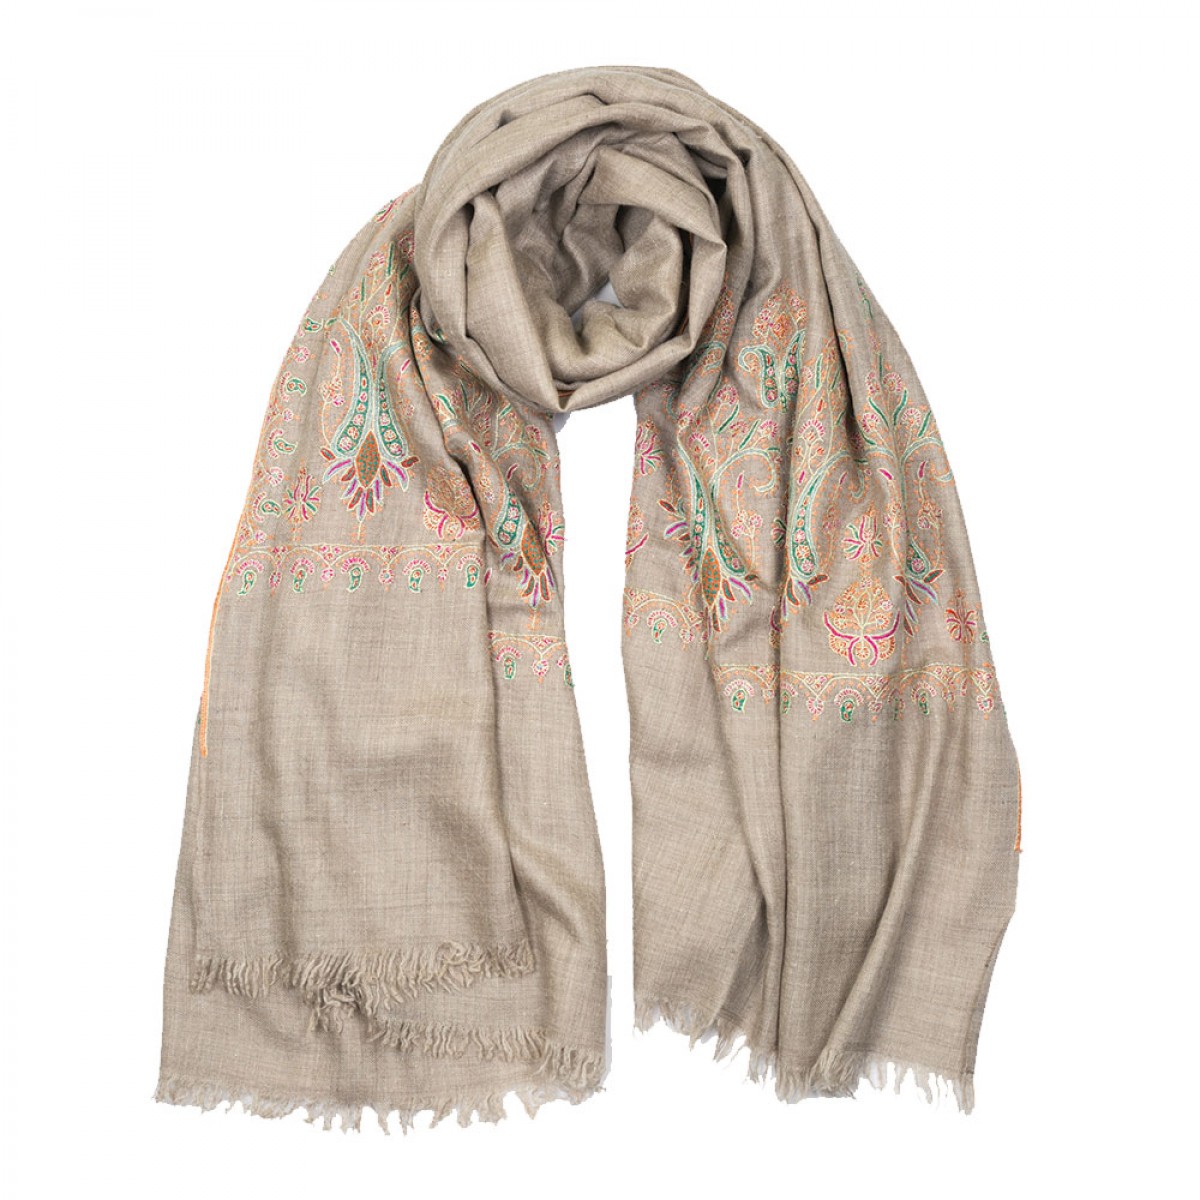 Embroidered Pashmina Shawl - Natural Color